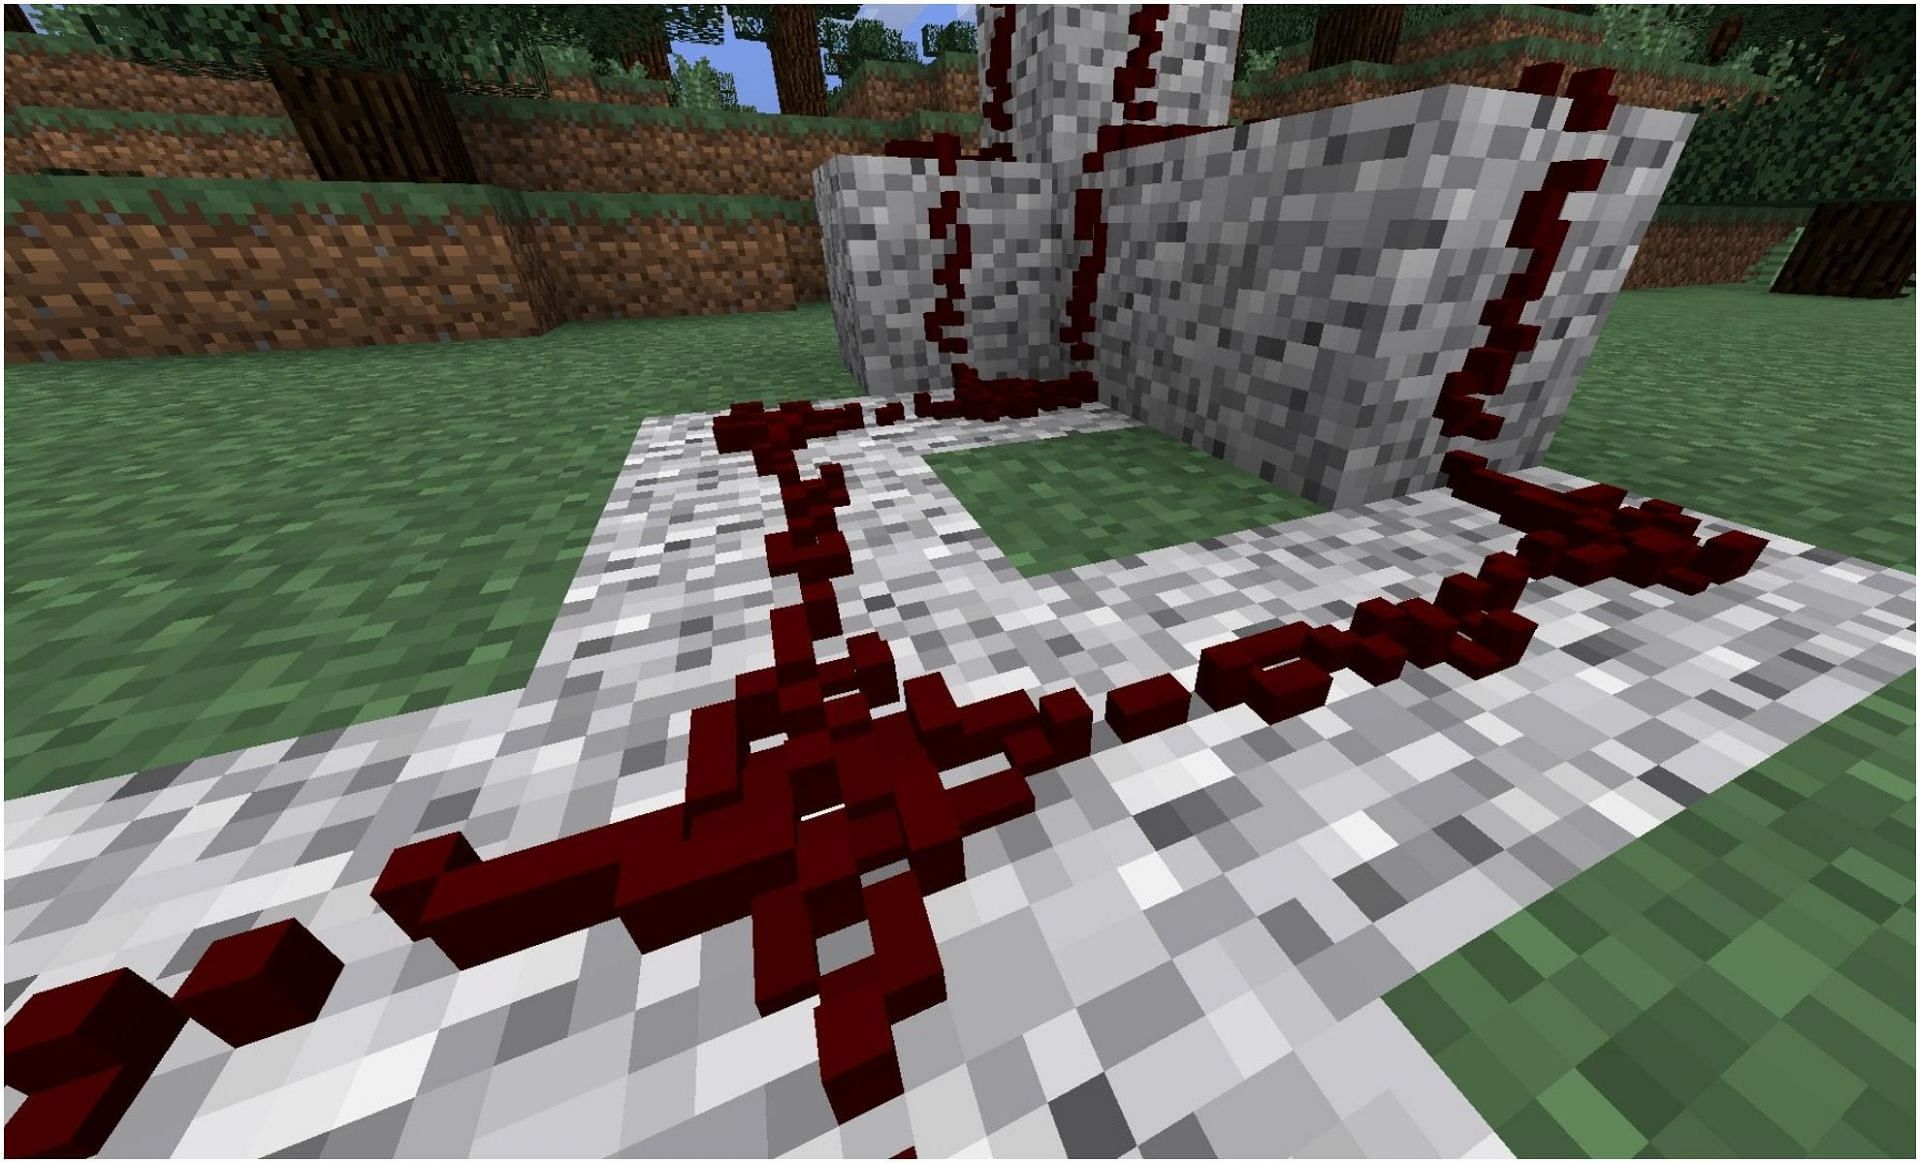 Redstone contraptions can make Minecraft more convenient (Image via u/Know2Good on Reddit)